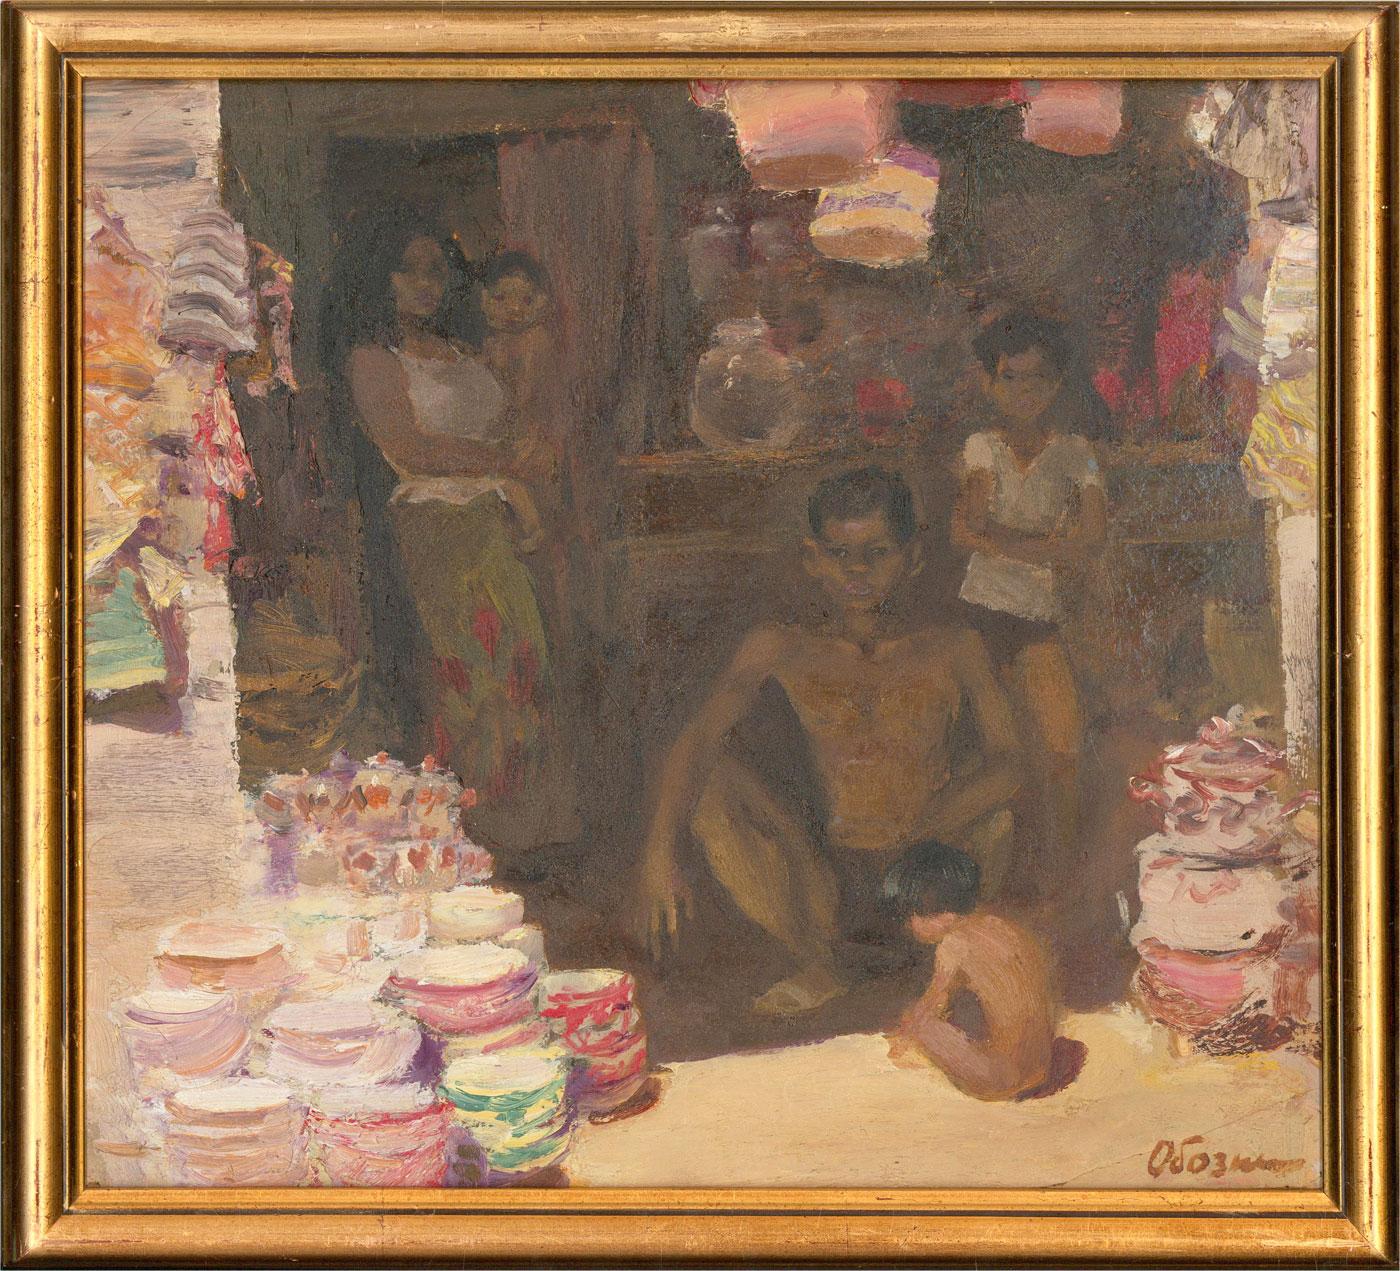 An accomplished oil painting by the Russian artist Dmitry Oboznenko, depicting a street pottery shop with figures. Signed to the lower right-hand corner. The artist's name, date and title 'Ð›Ð°Ð²ÐºÐ°' are inscribed on the reverse. Presented in a